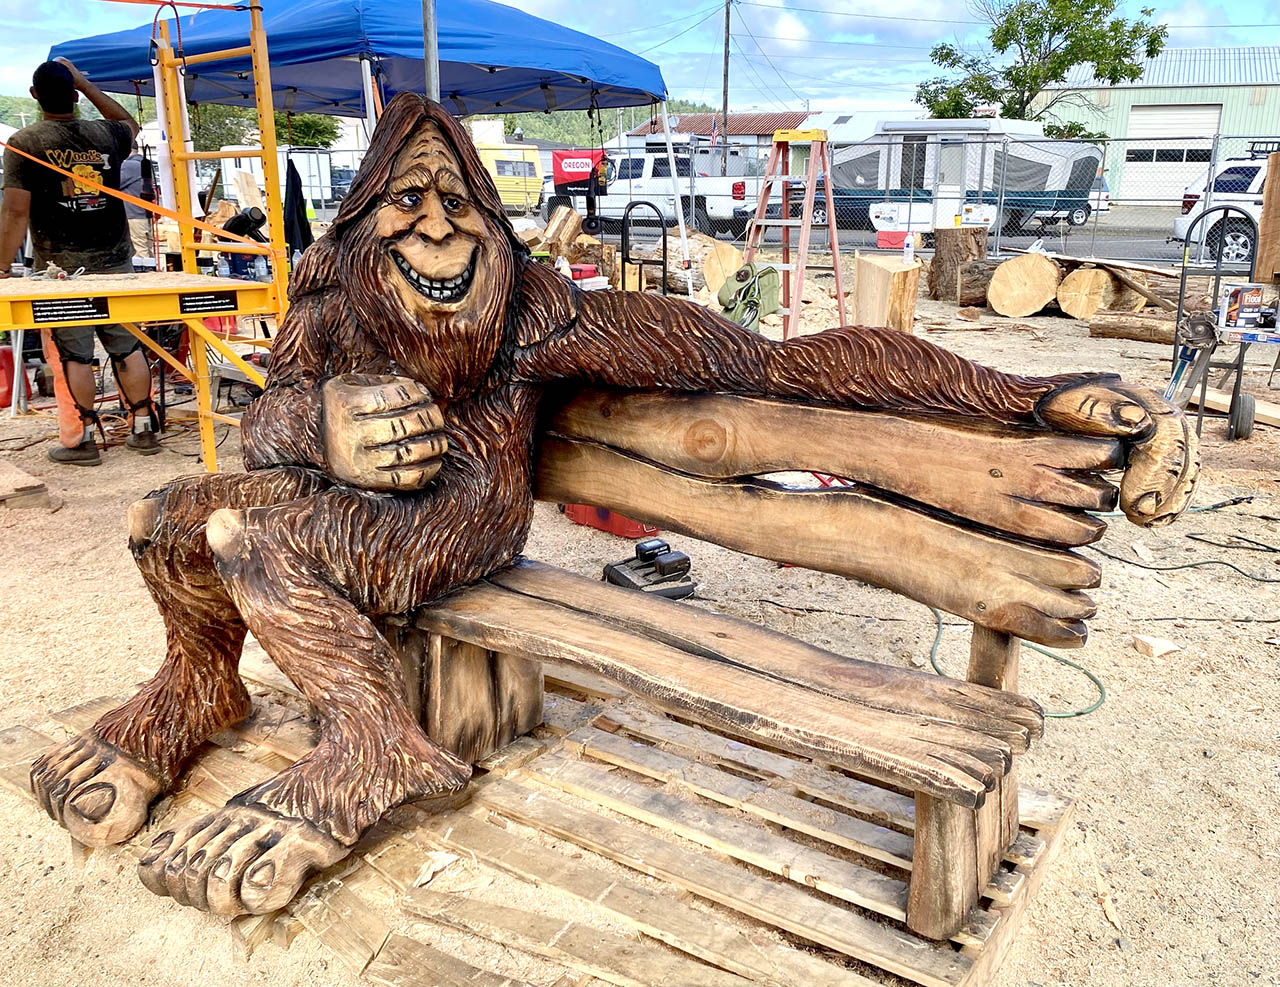 Chainsaw carving of a sasquatch sitting on bench at the Oregon Divisional Chainsaw Carving Championship in Reedsport, Oregon